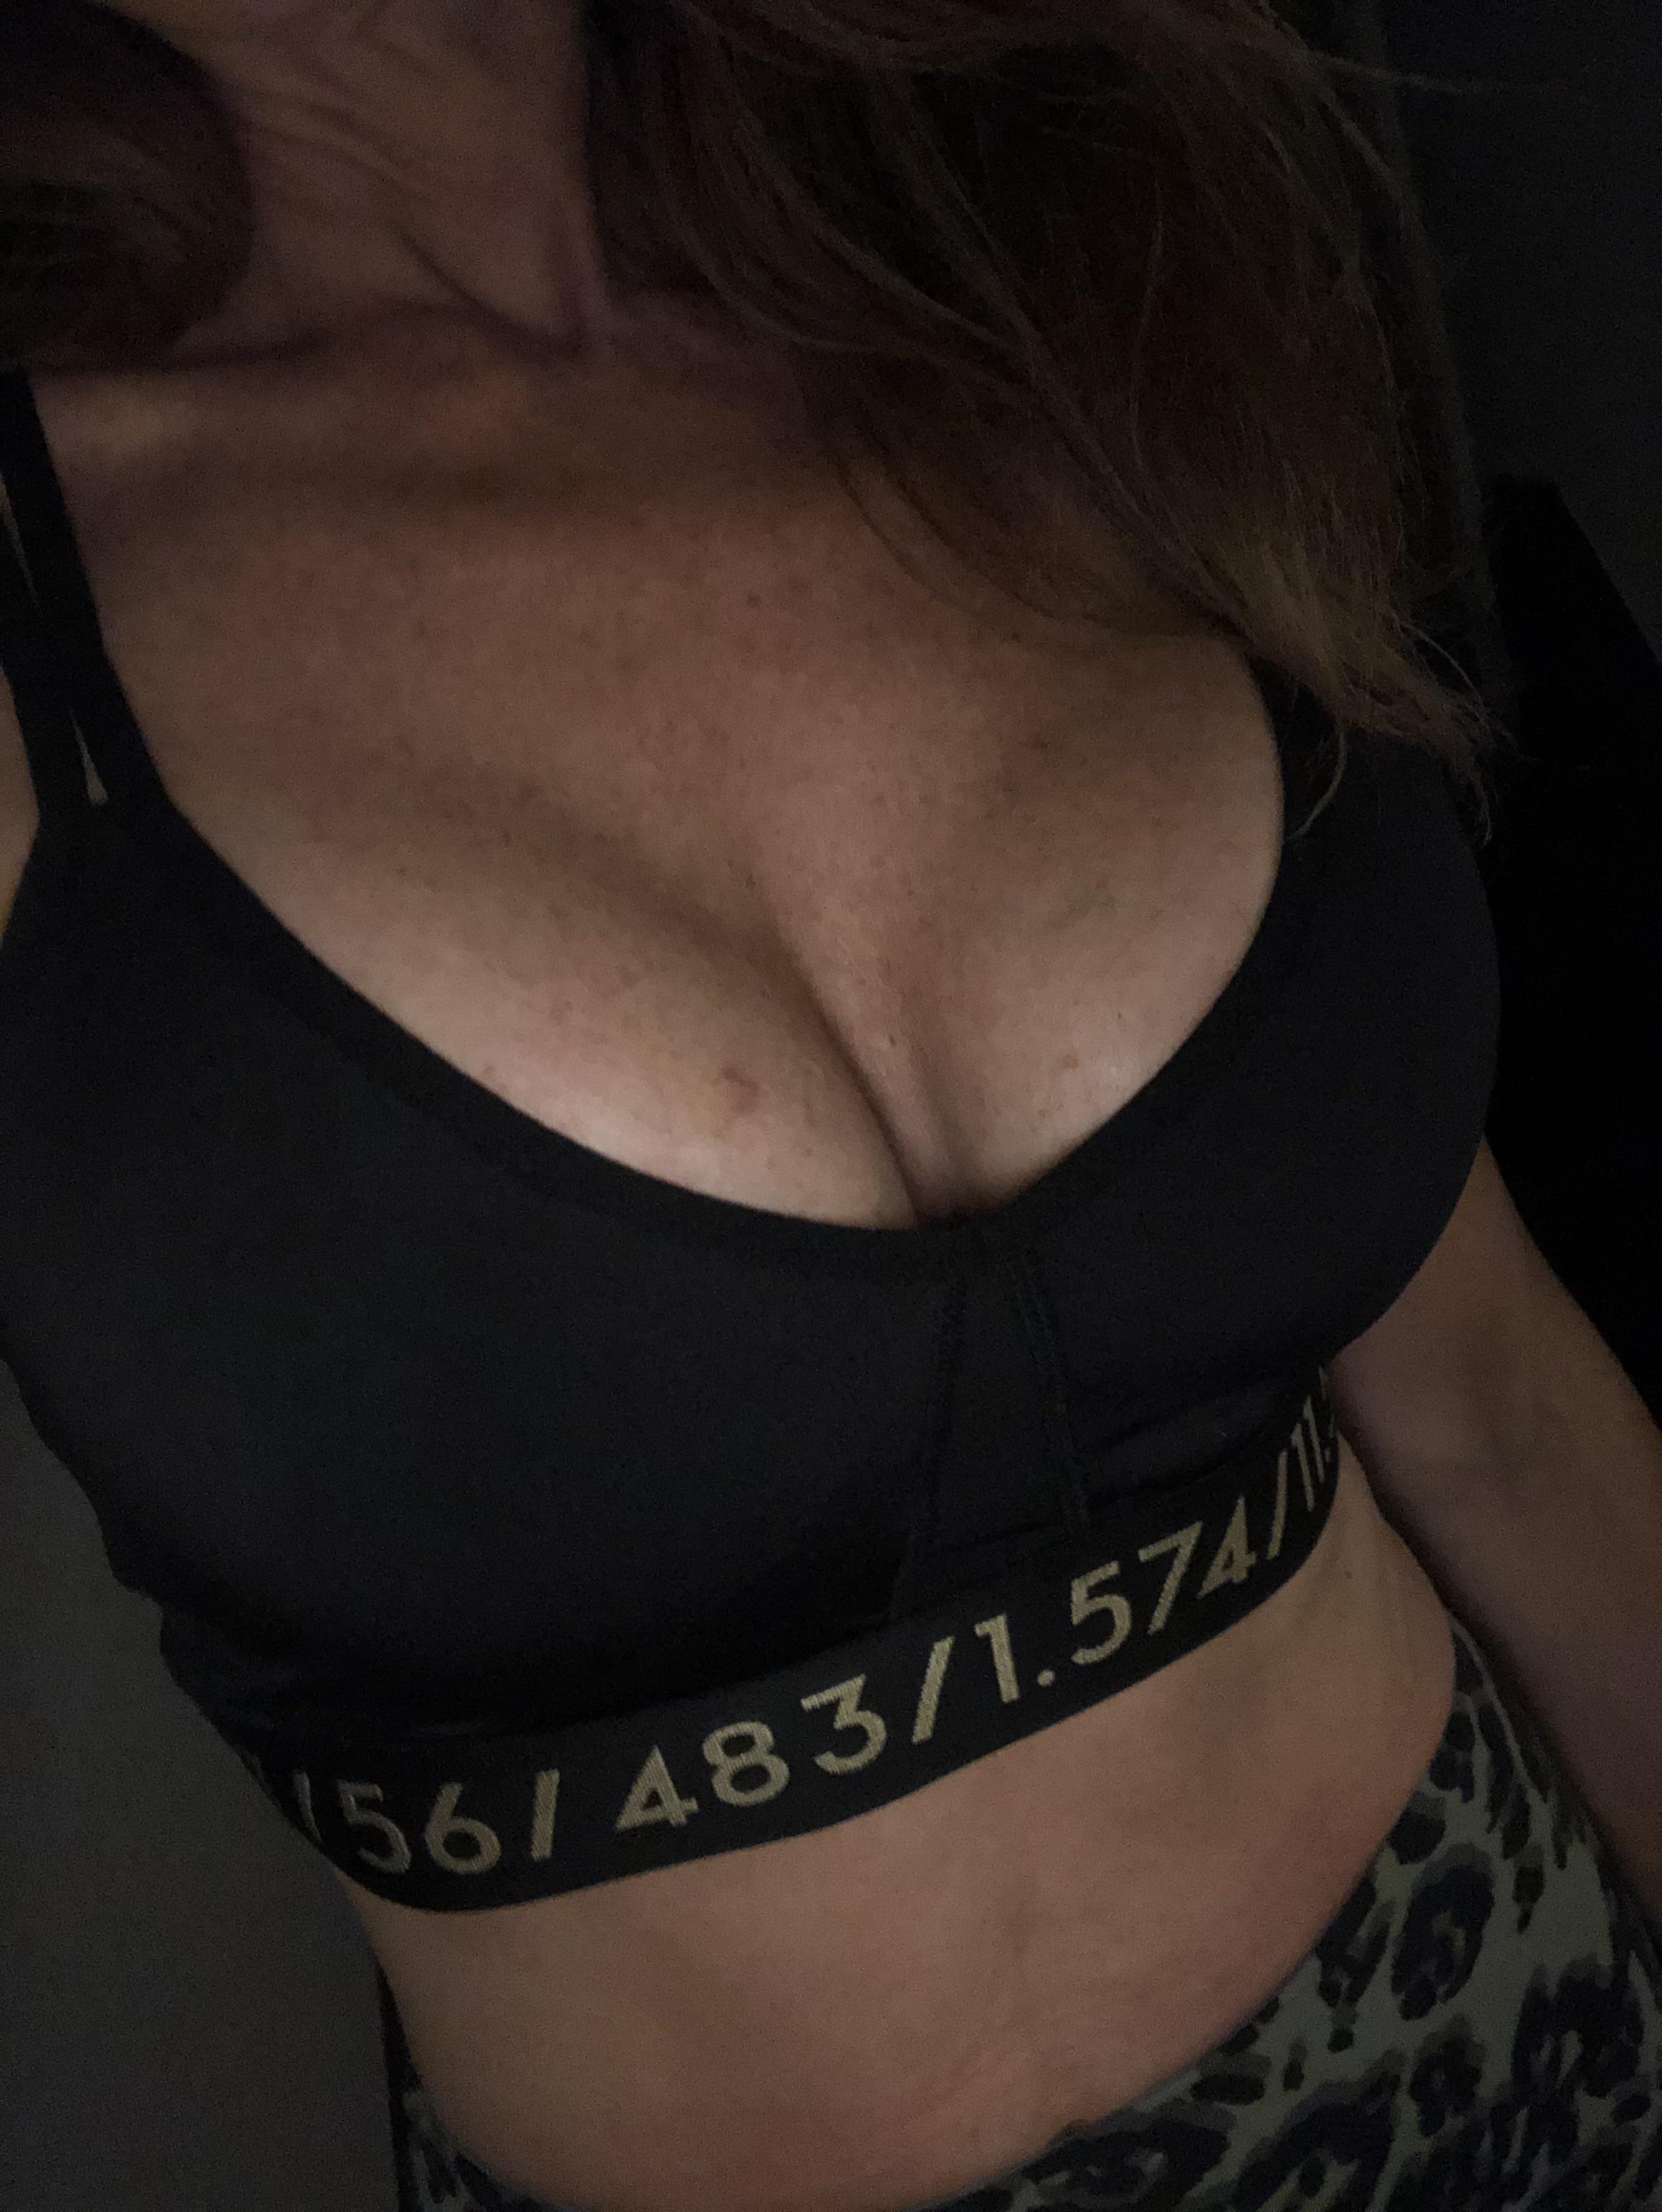 Letting it hang out a little 58(f)